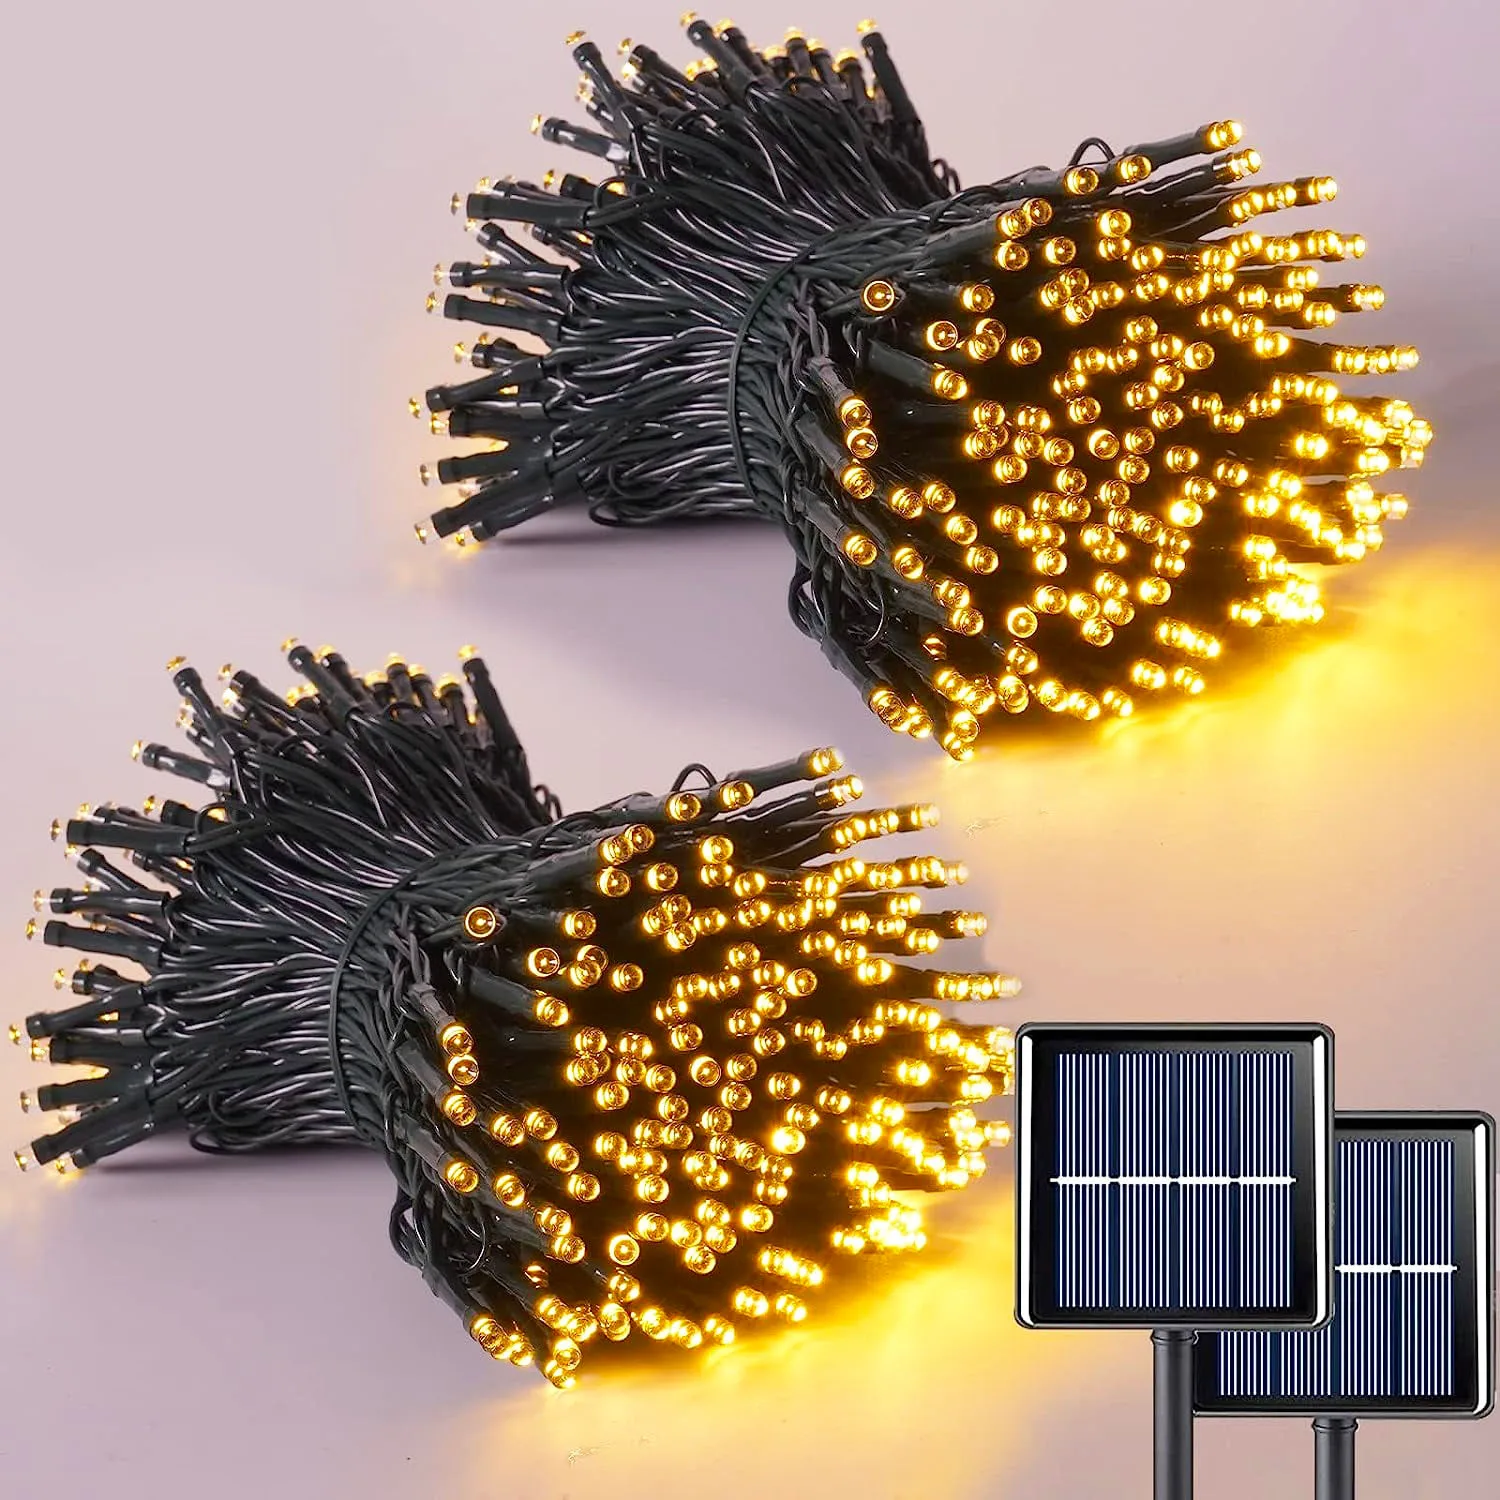 2Pack Solar String Lights Outdoor Waterproof Fairy Christmas Twinkle Lights with 8 Modes Tree Lights for Outdoor Garden Patio solar led lighted patio umbrella cantilever hanging umbrella with 8 brightness modes outdoor decors suitable for courtyard beach